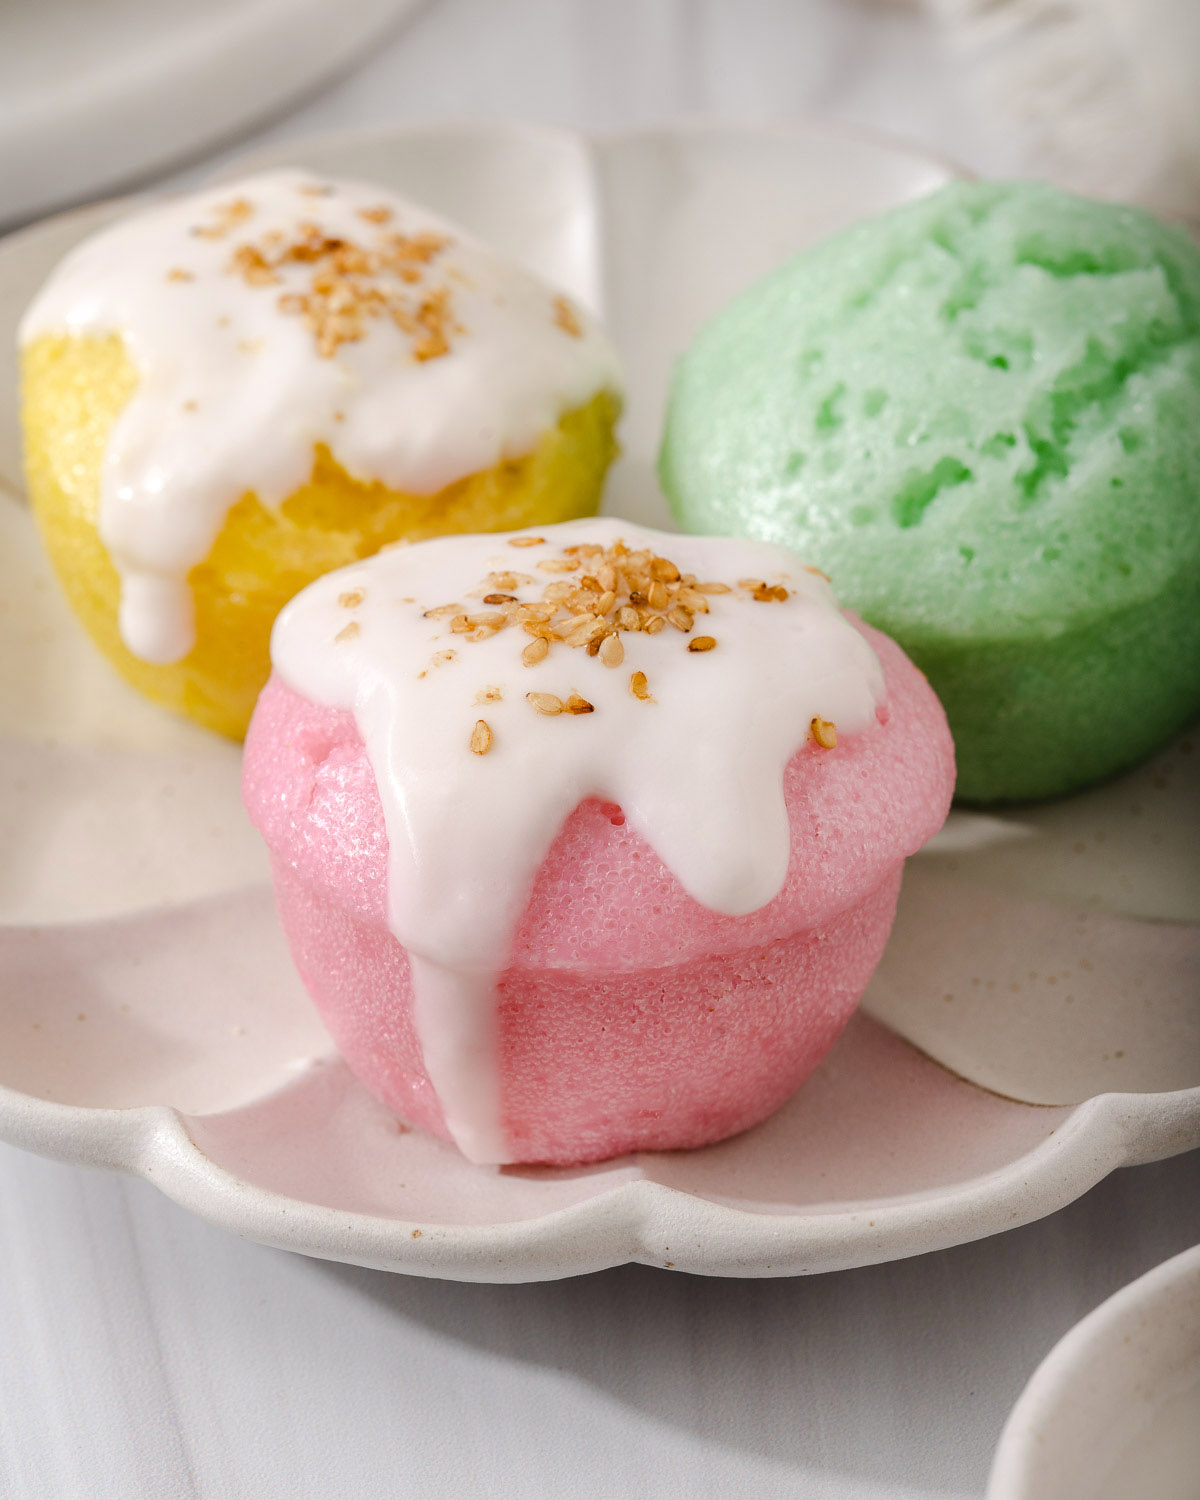 Up close of colorful Vietnamese steamed rice cakes with a coconut cream sauce and sesame seeds.